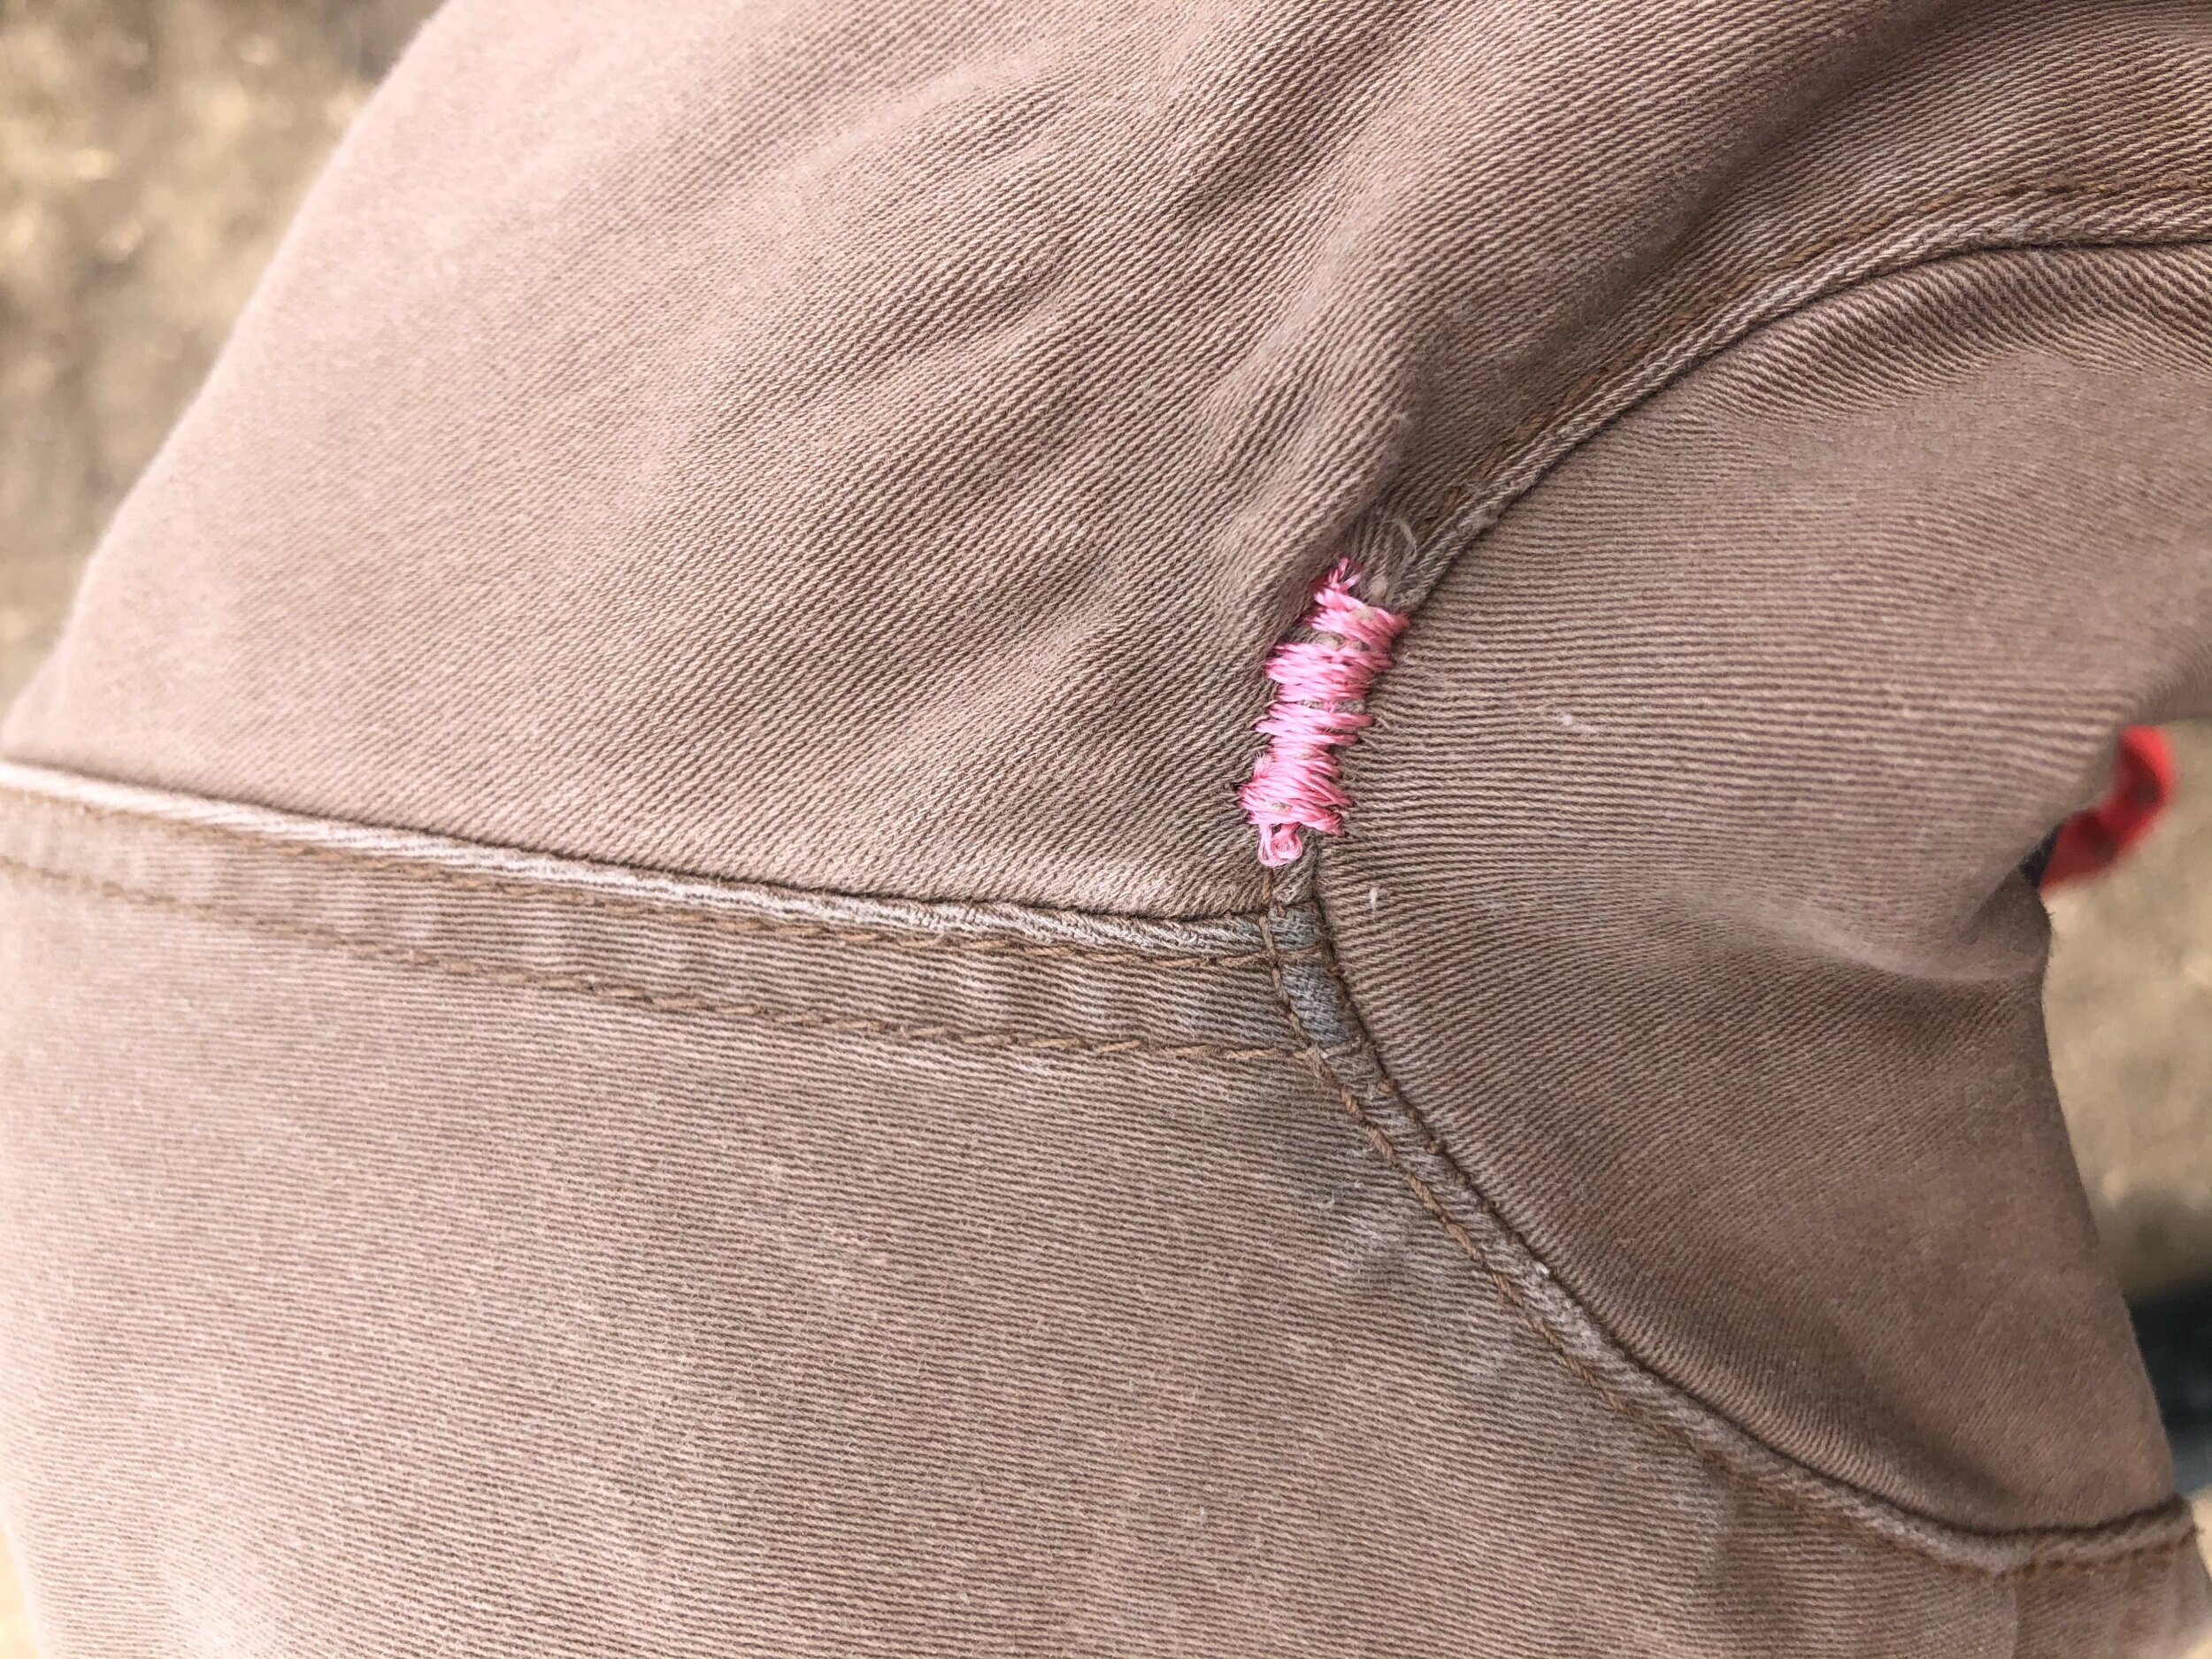 small hole at gusset covered with satin stitch